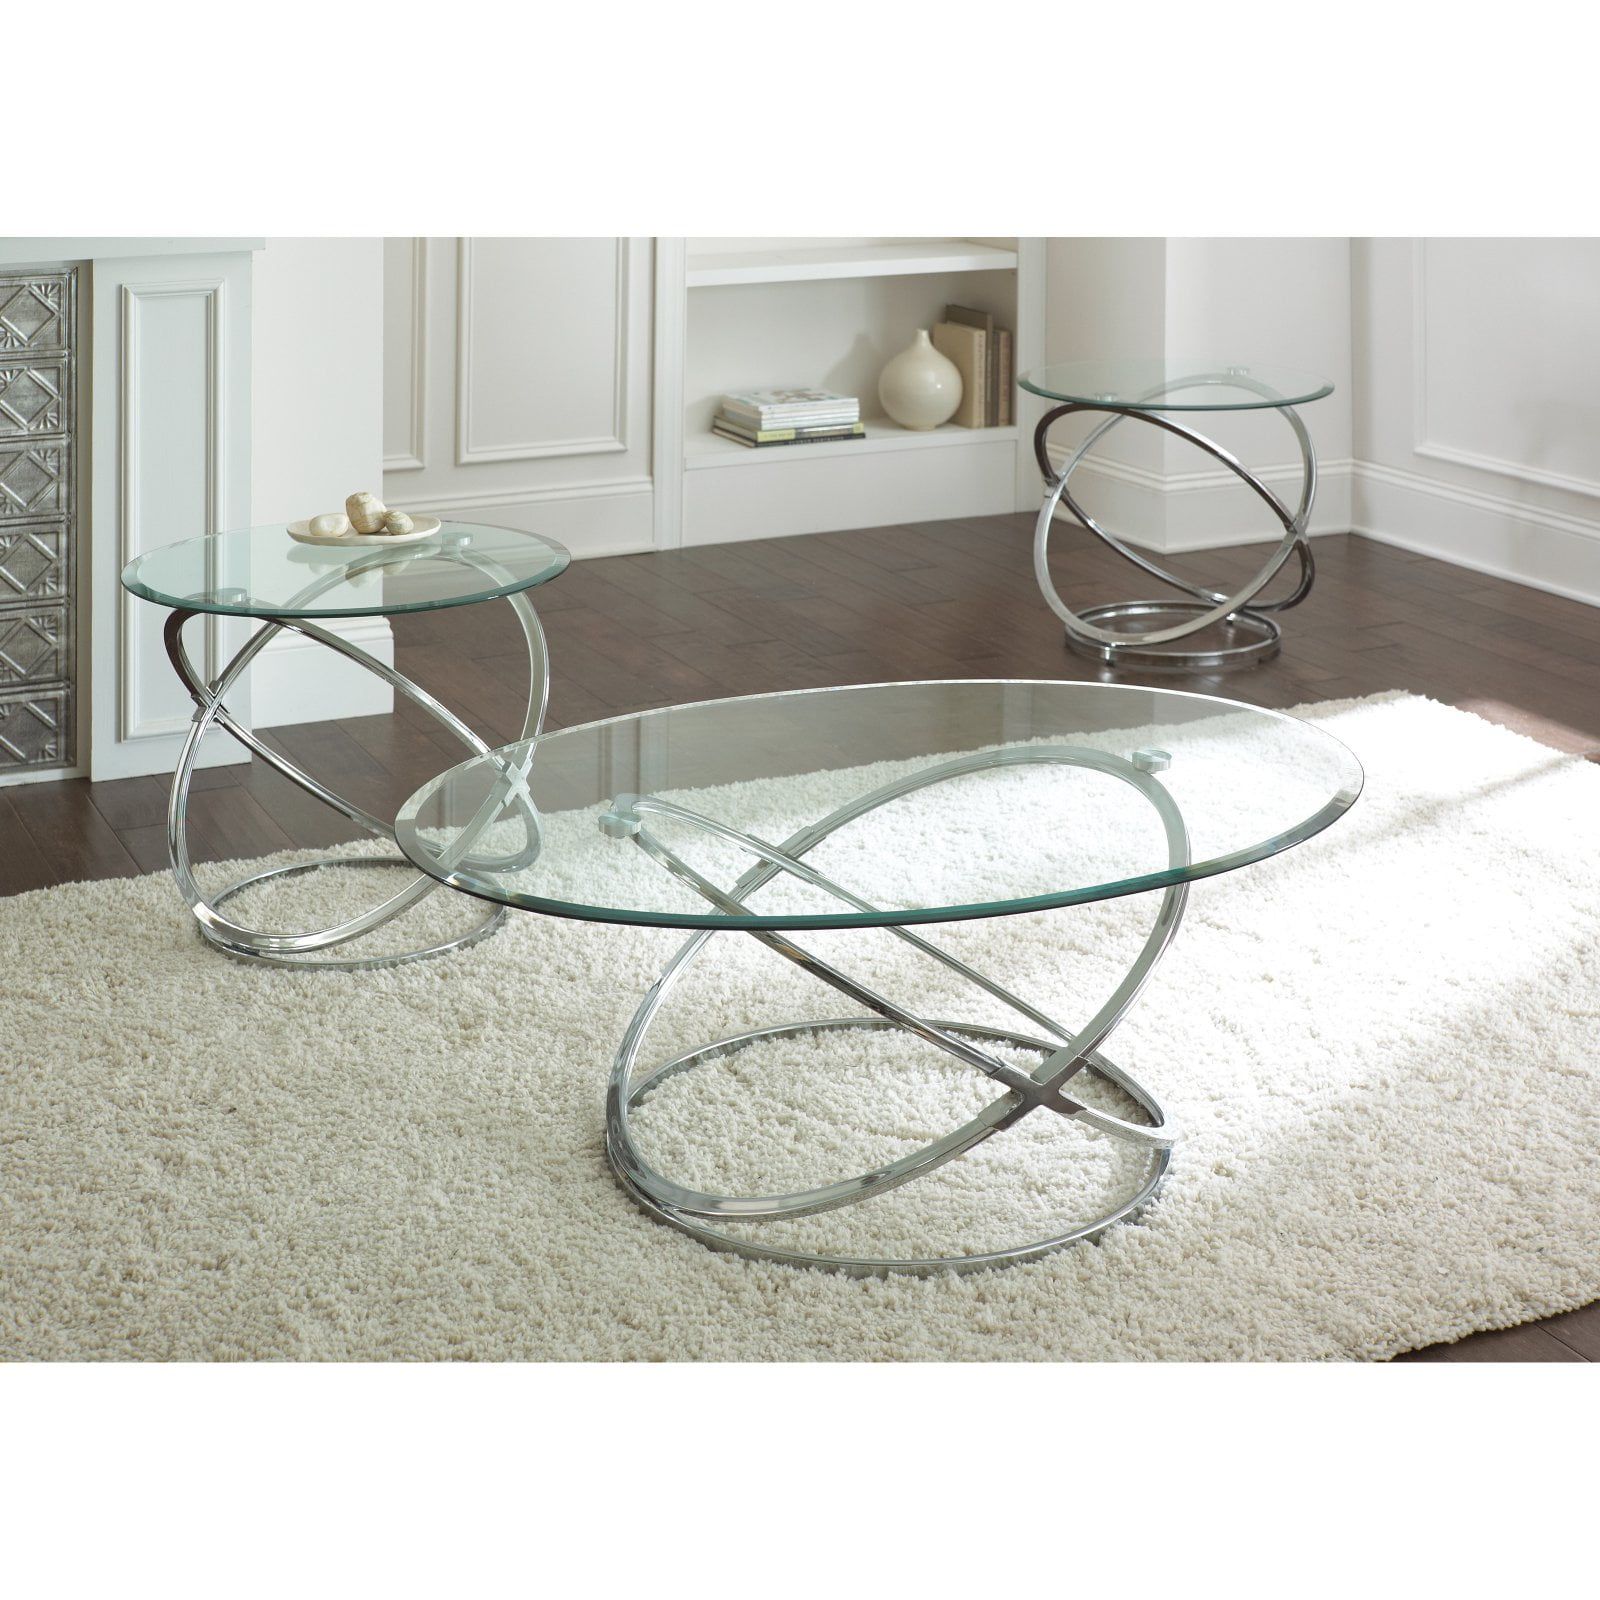 Steve Silver Orion Oval Chrome And Glass Coffee Table Set – Walmart Within Tempered Glass Oval Side Tables (View 19 of 20)